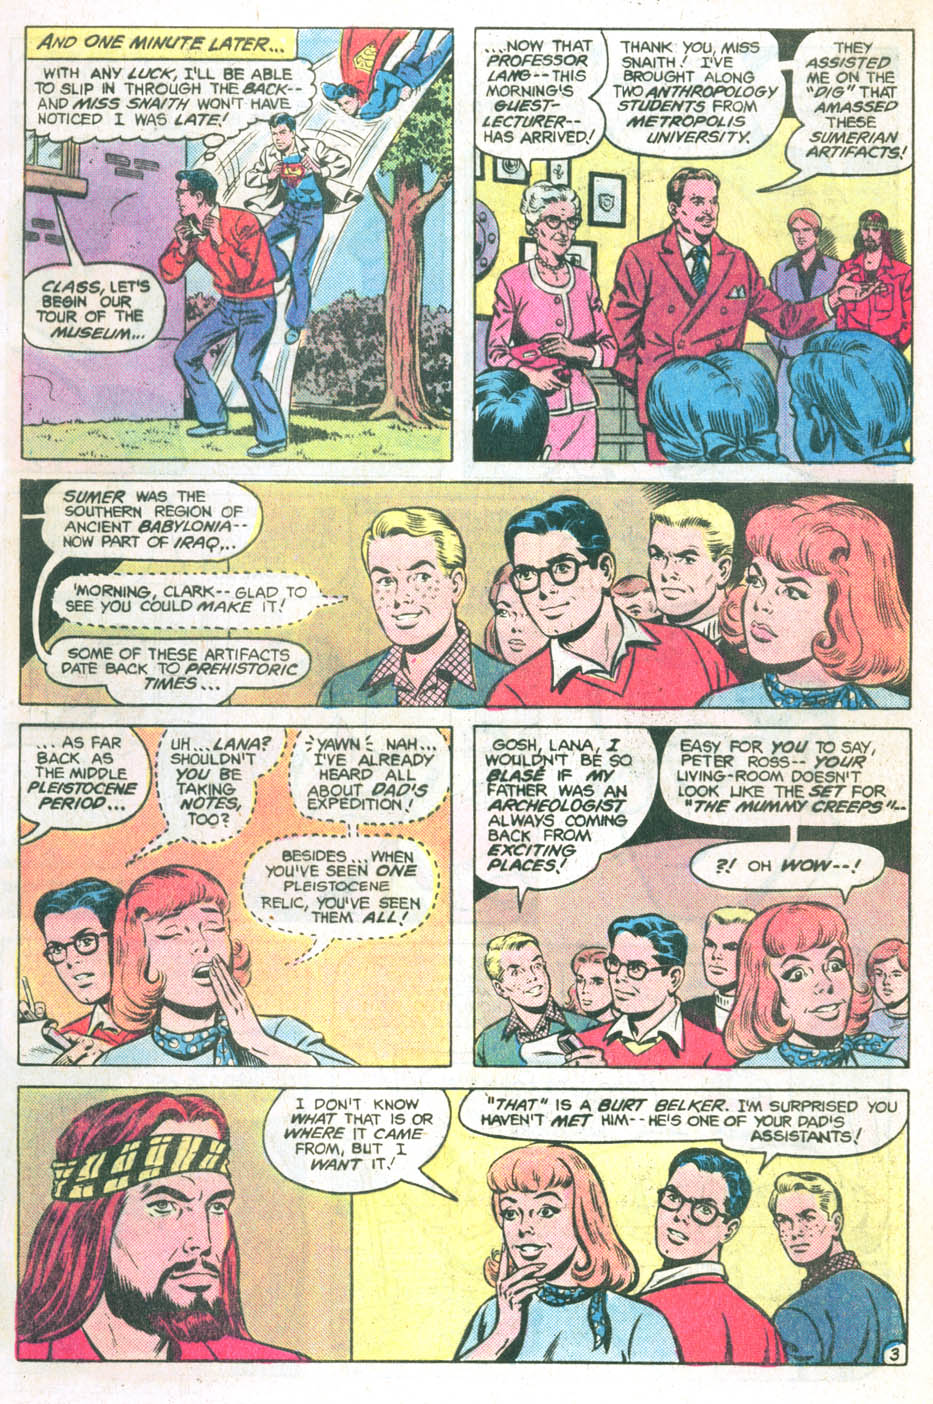 The New Adventures of Superboy 25 Page 3